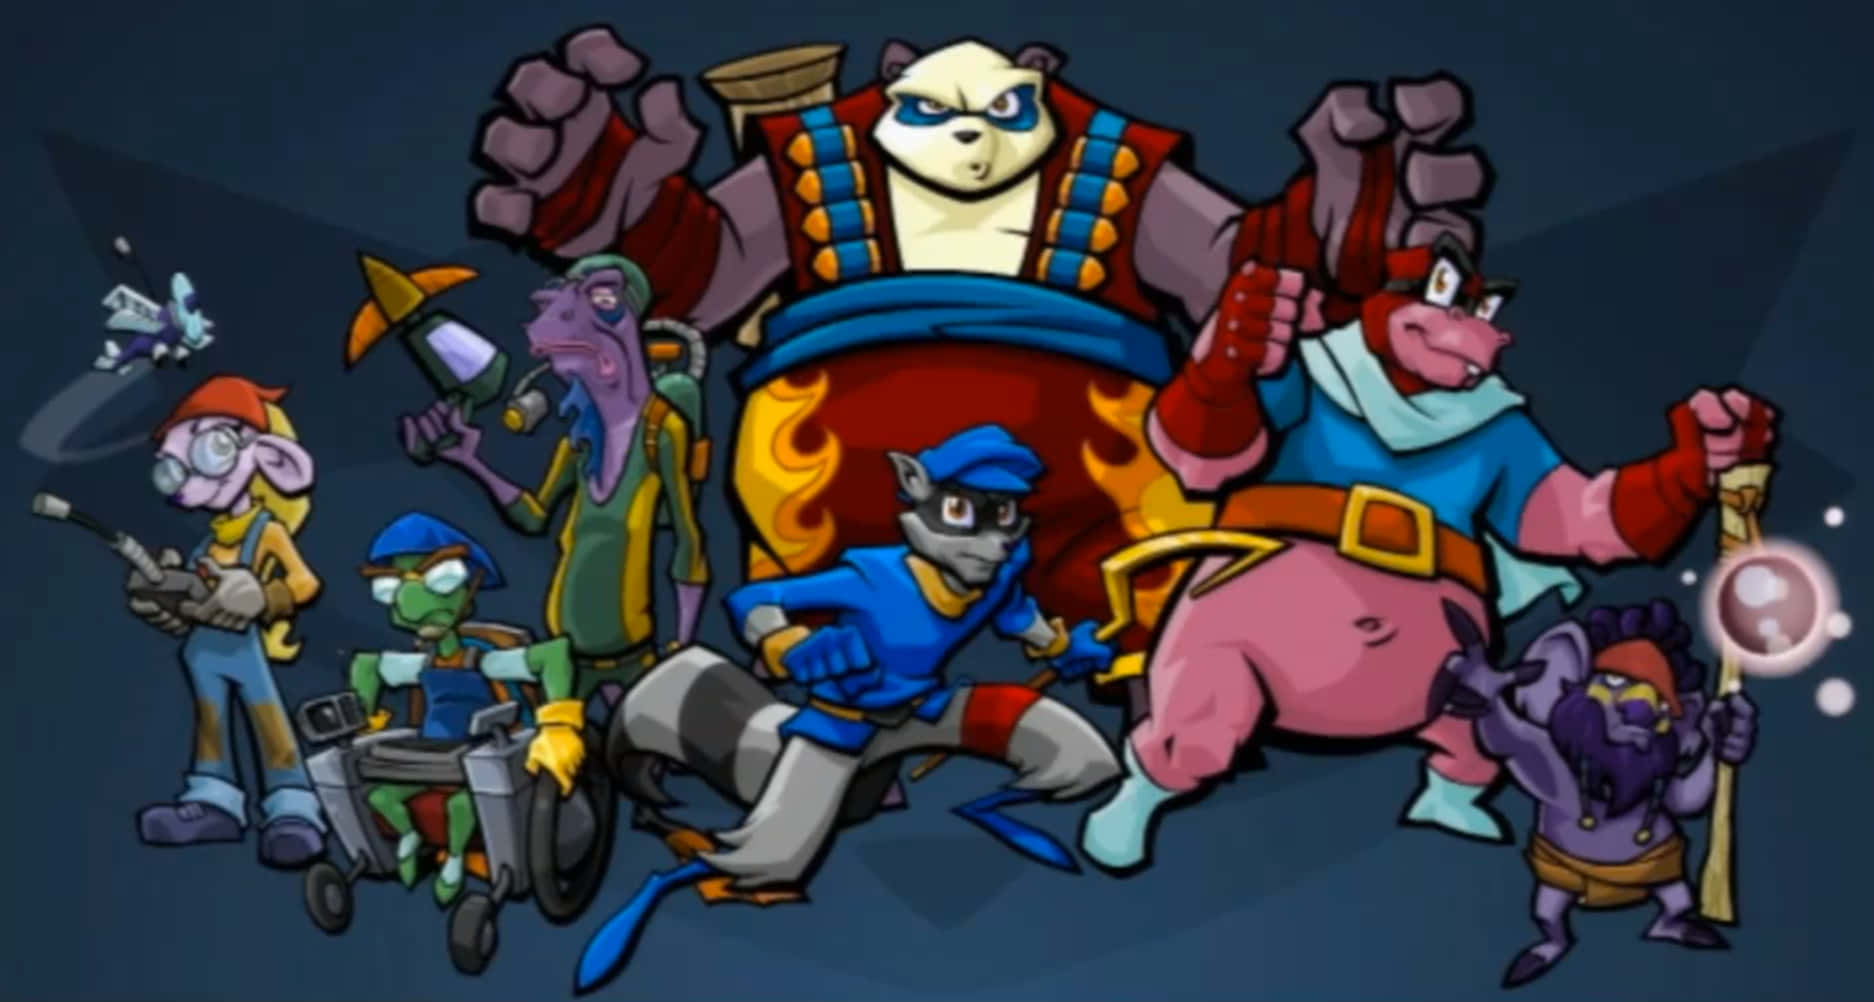 Sly Cooper Characters Wallpaper